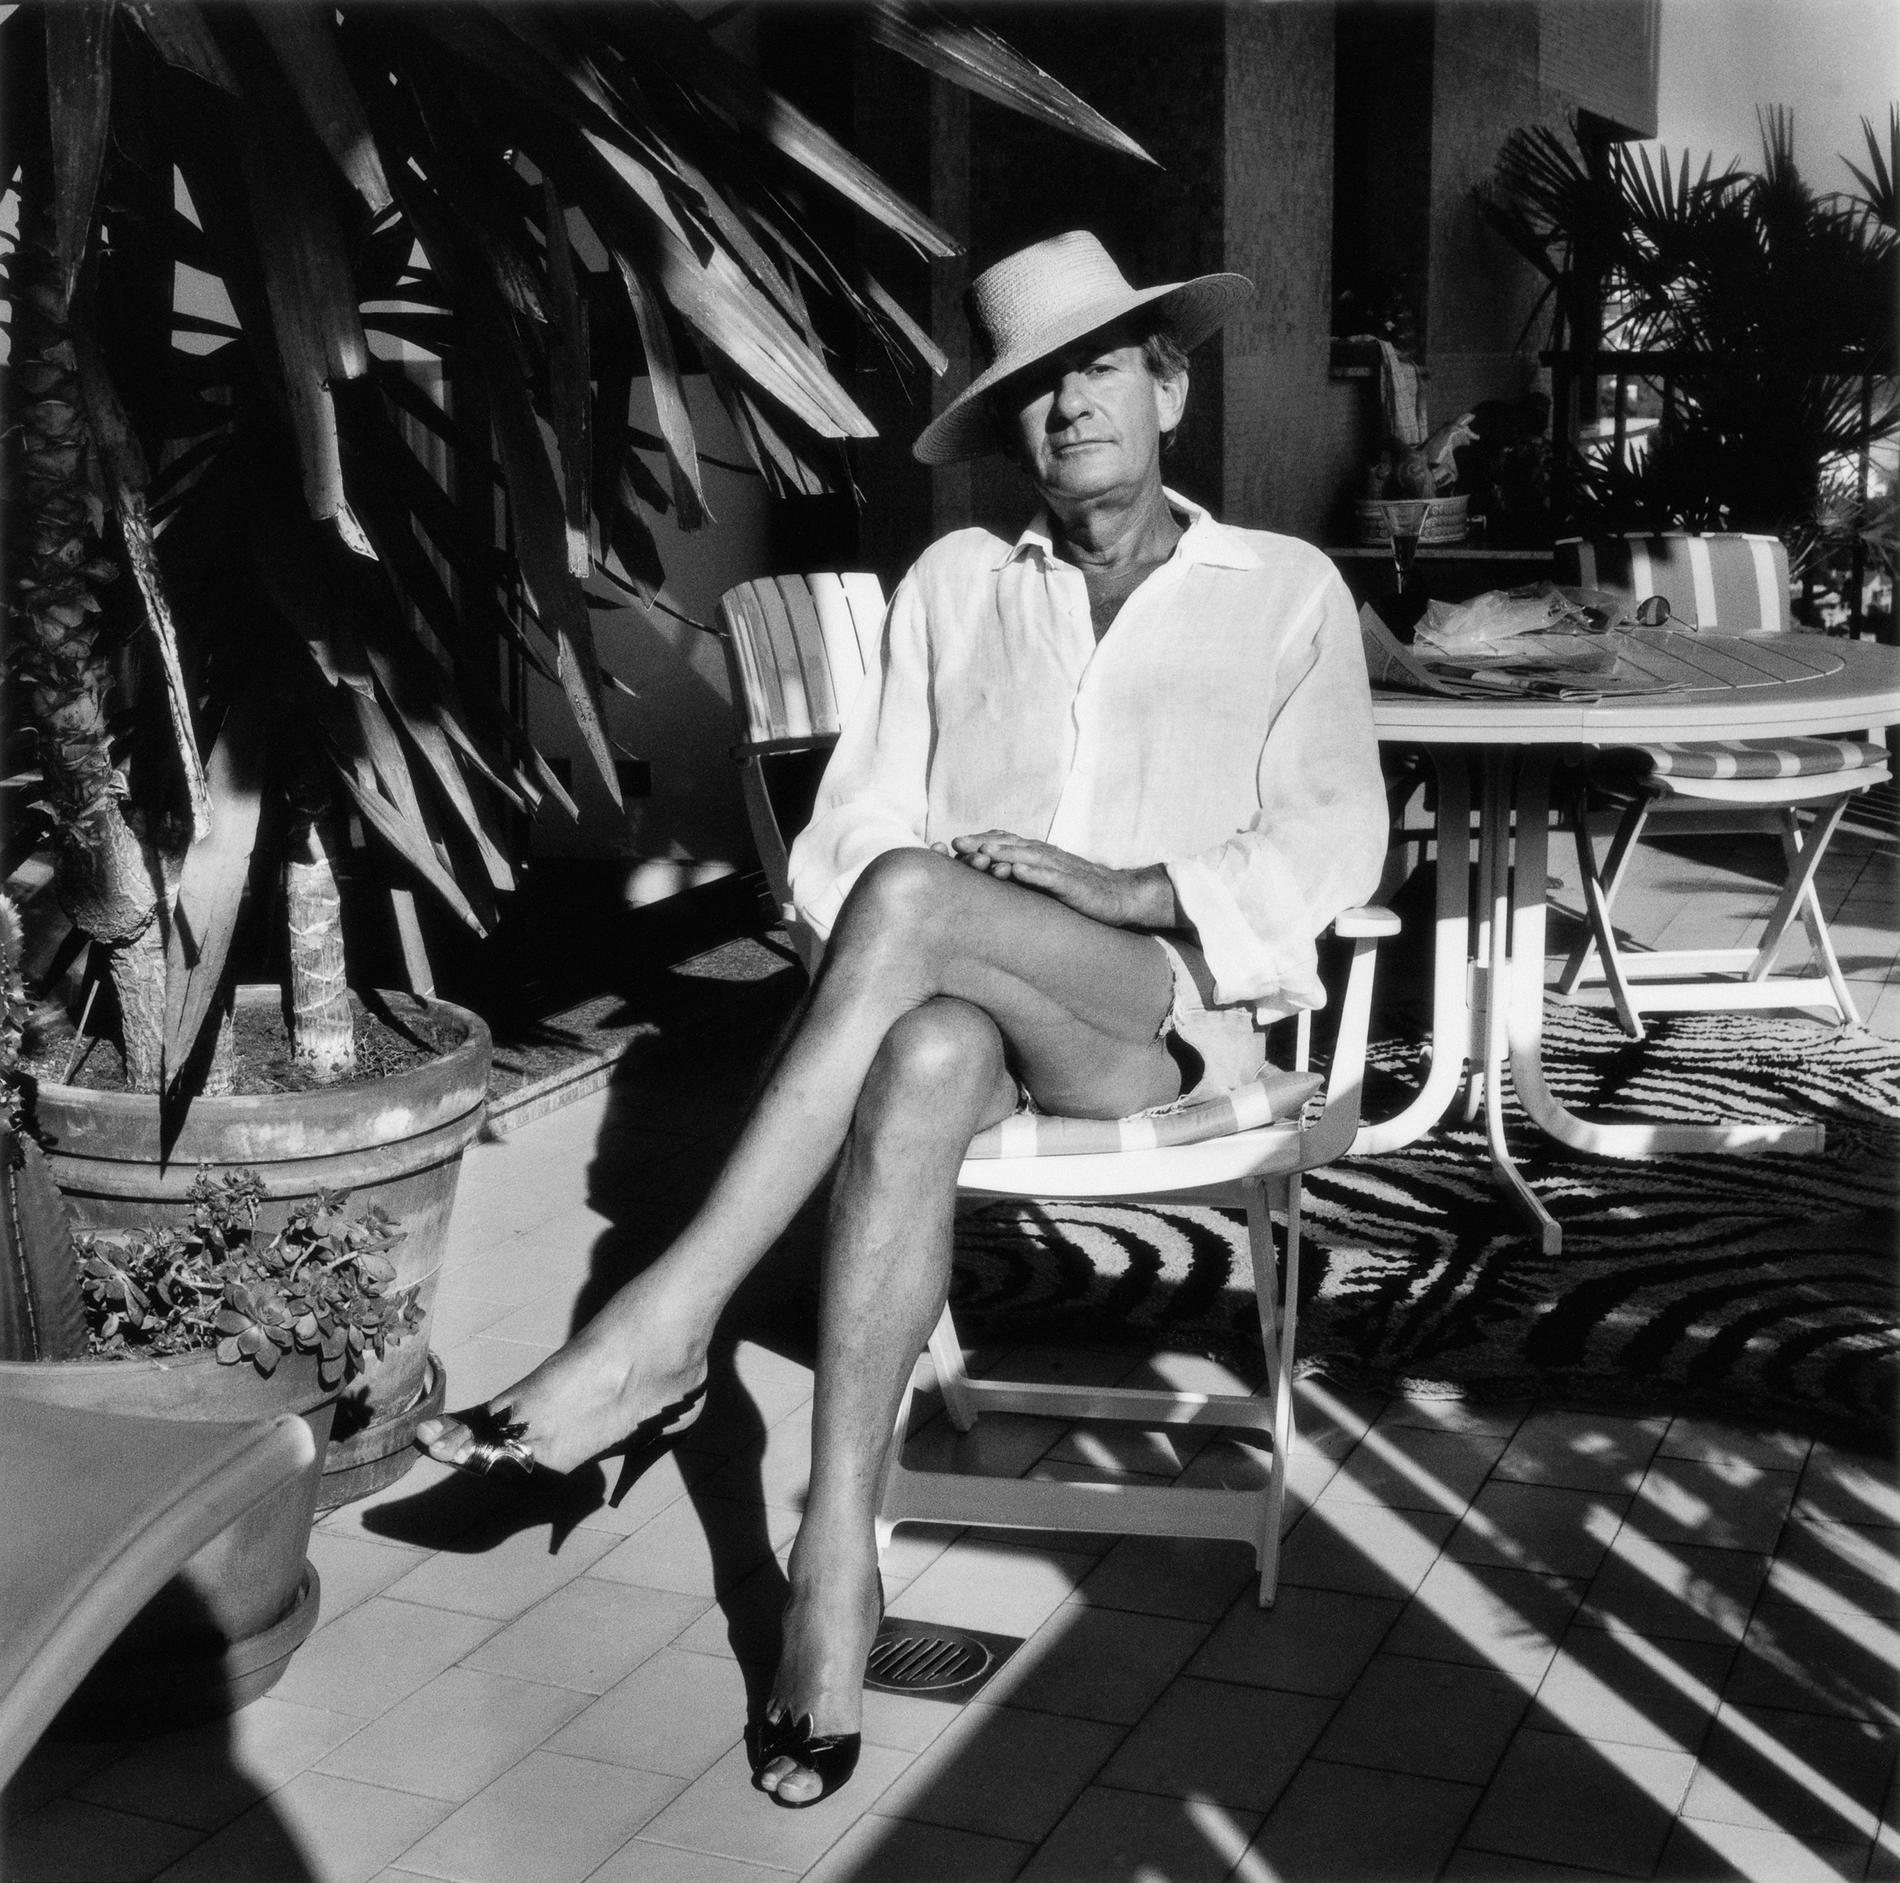 "Helmut Newton: The bad and the beautiful"